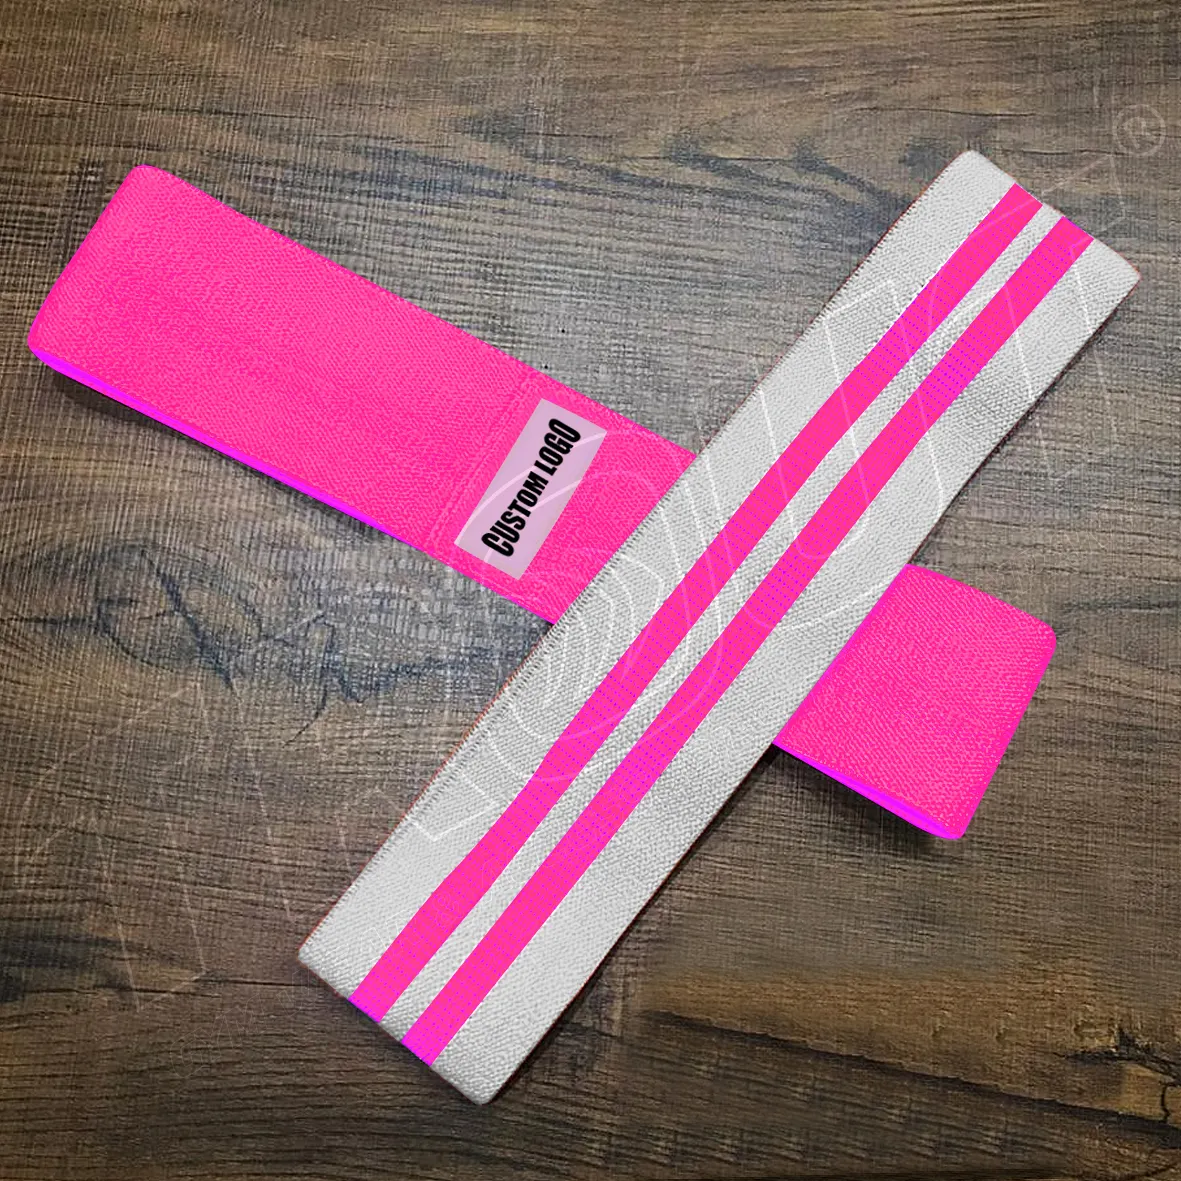 Perfect Hot Pink Athletics Hip Band - Non Slip Fabric Resistance Bands for Women